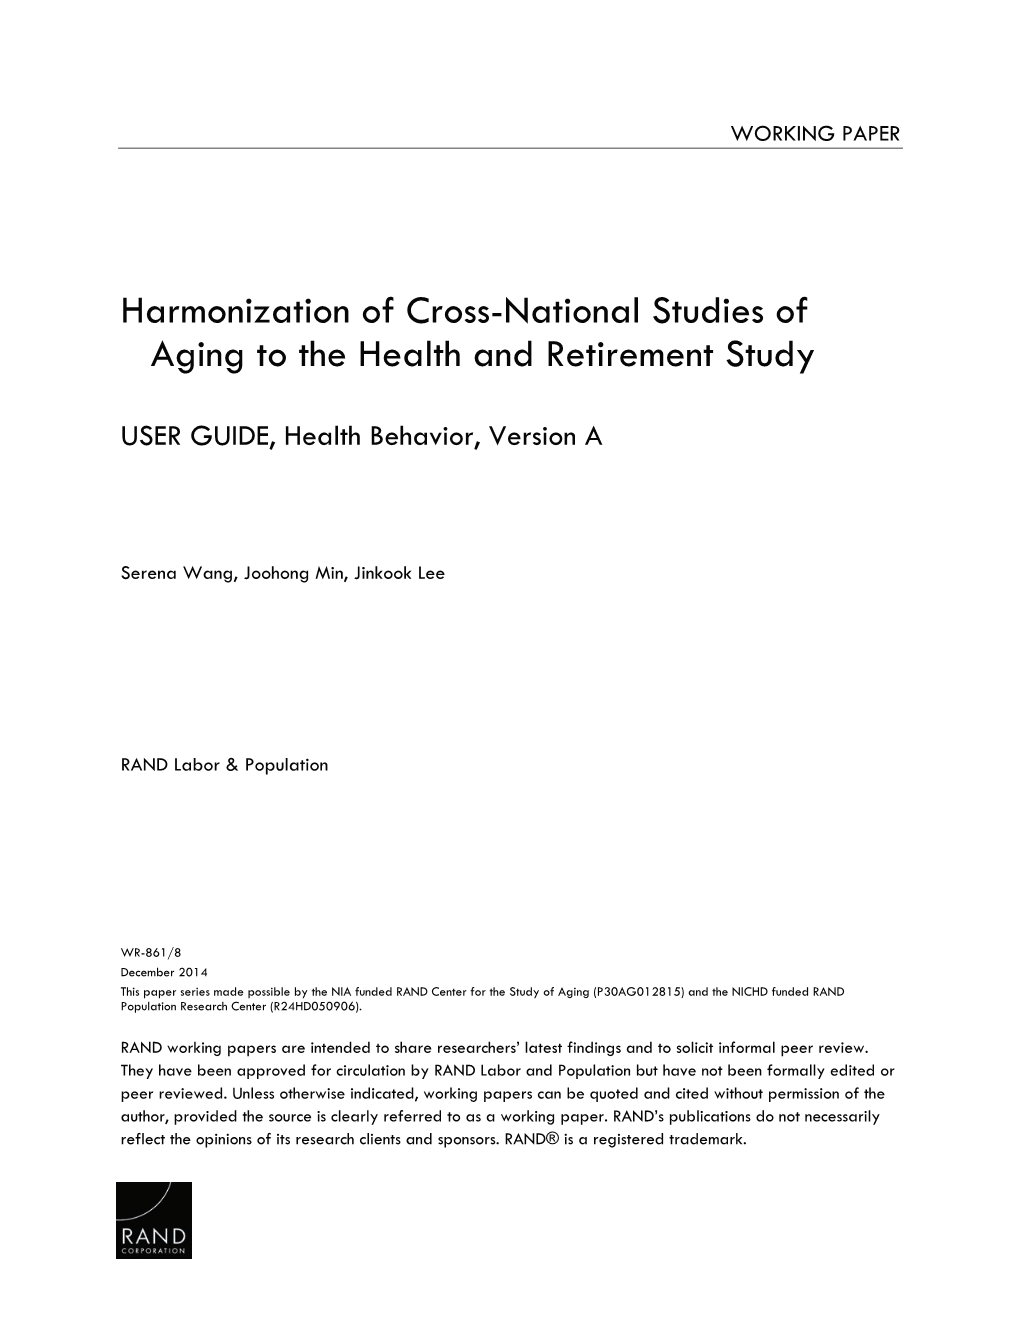 Harmonization of Cross-National Studies of Aging to the Health and Retirement Study